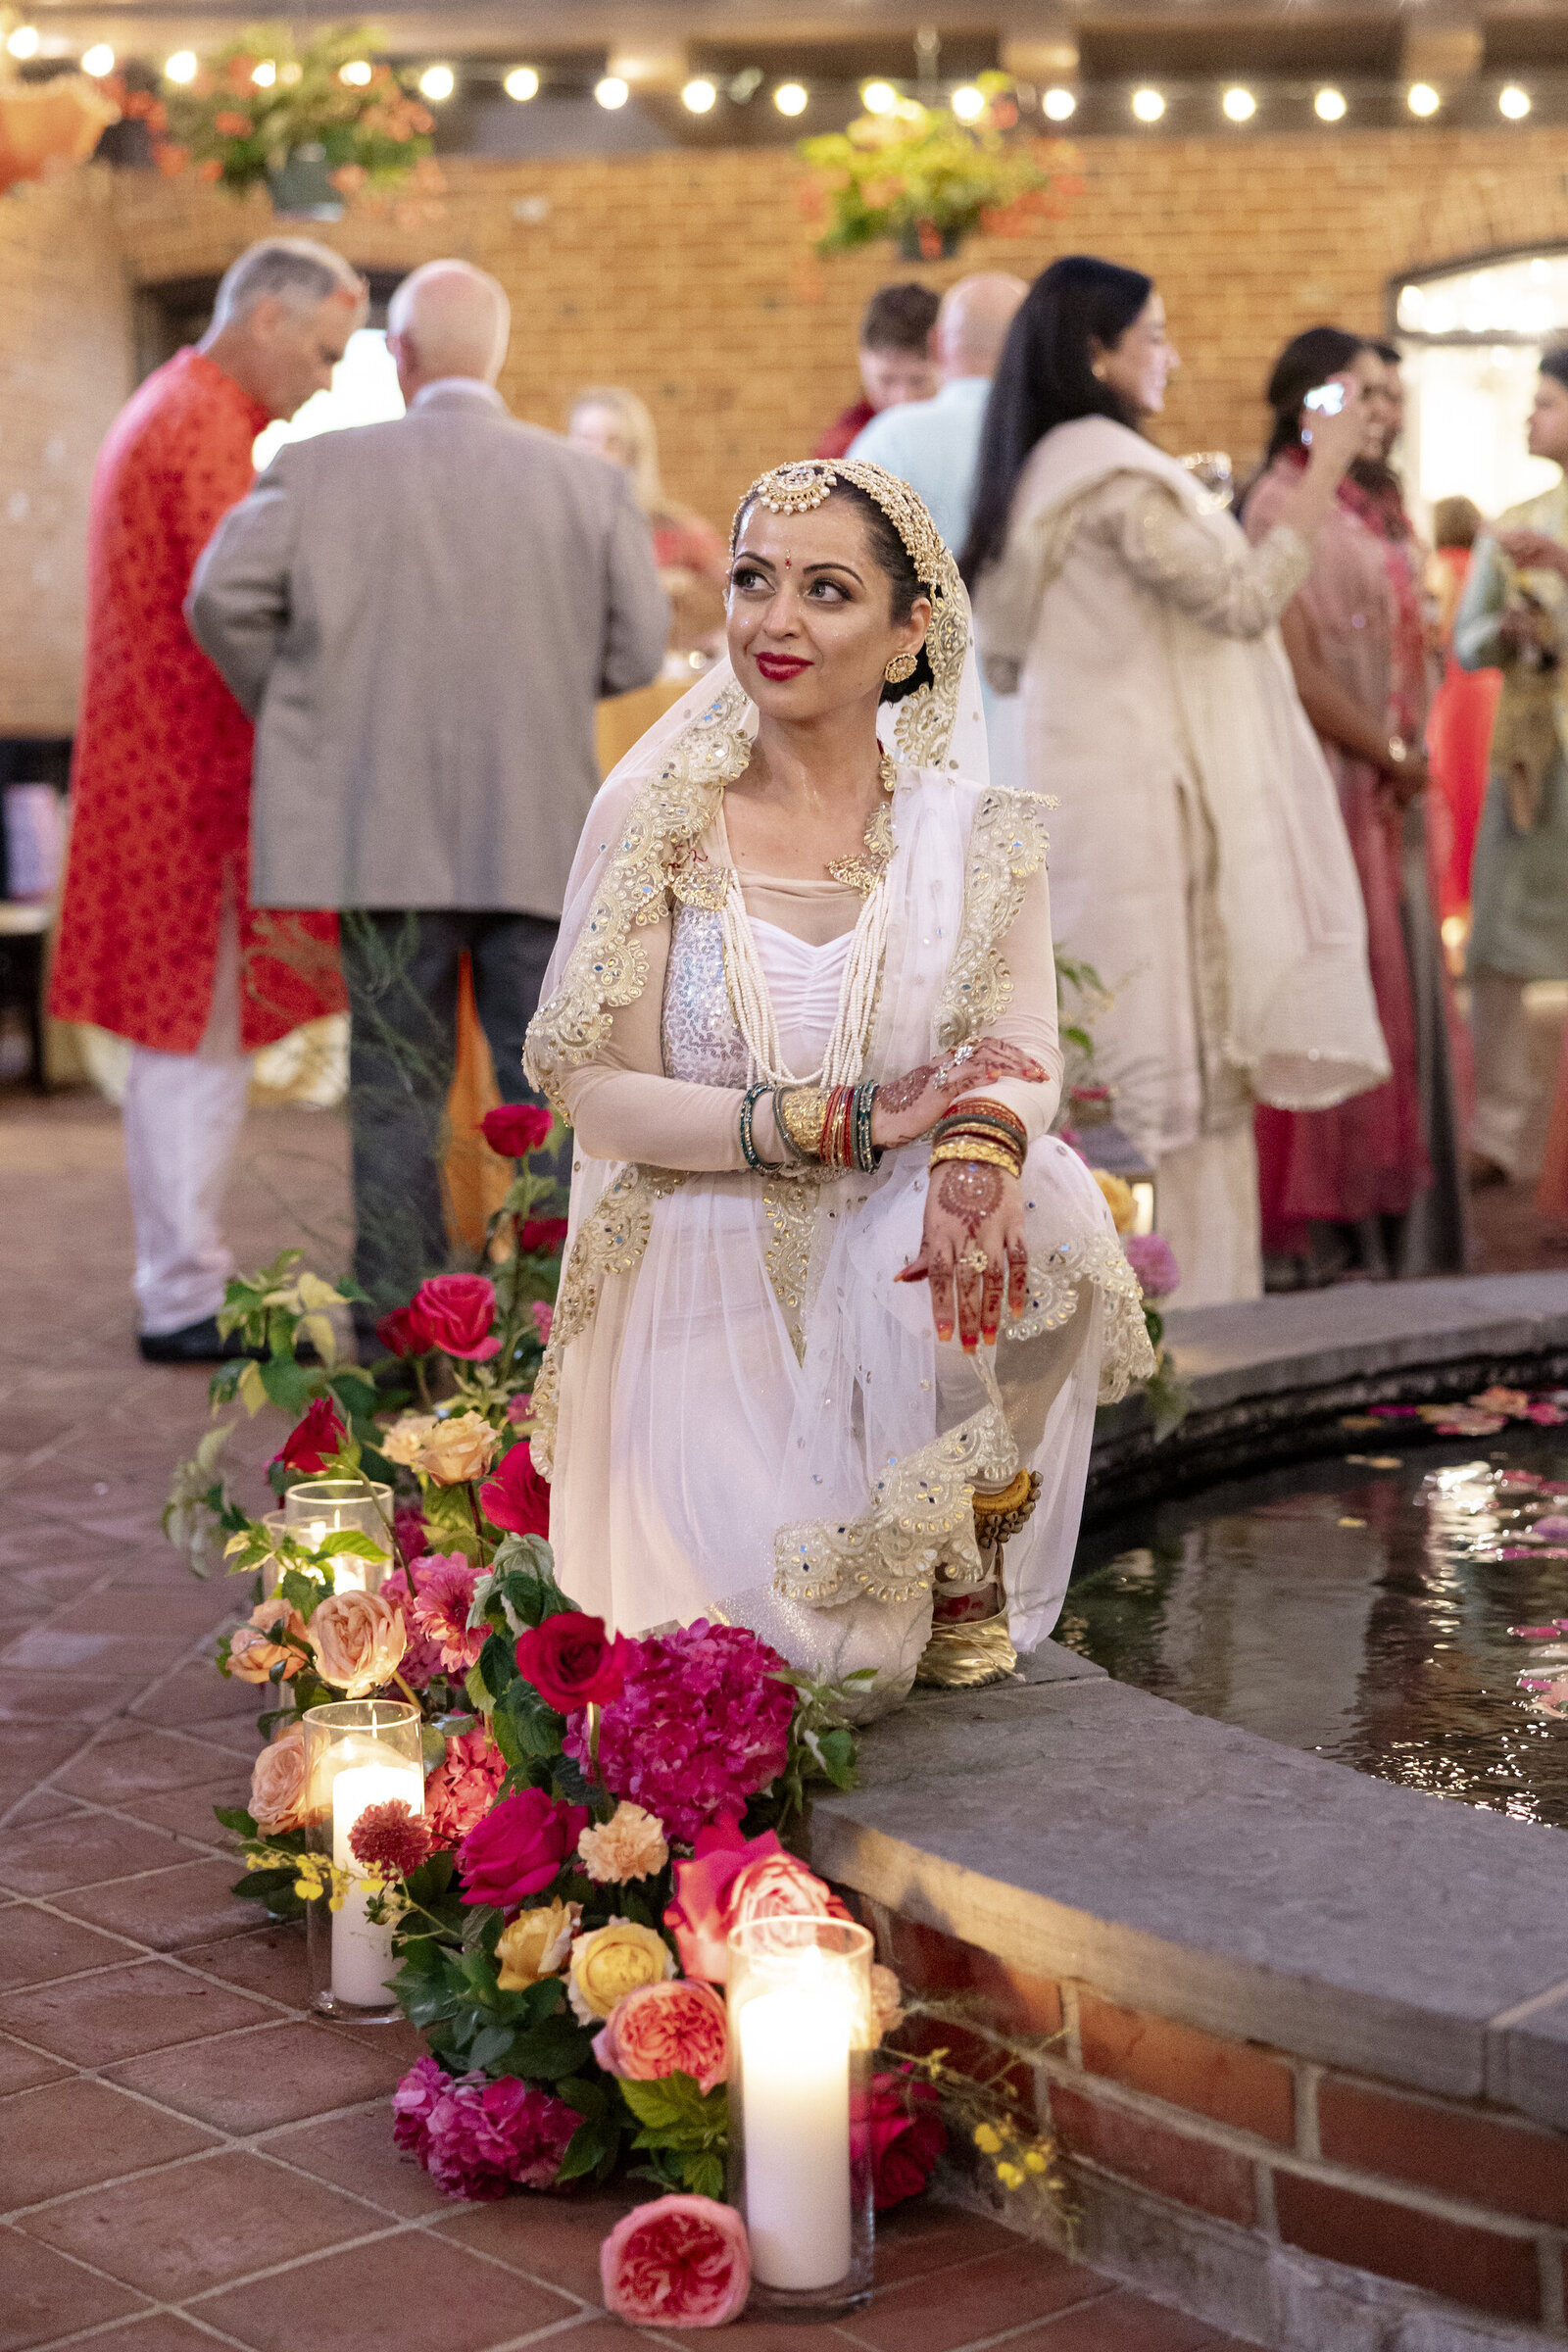 Woman sitting on the side of the fountain with wedding guests in the background and florals and candles to her side.